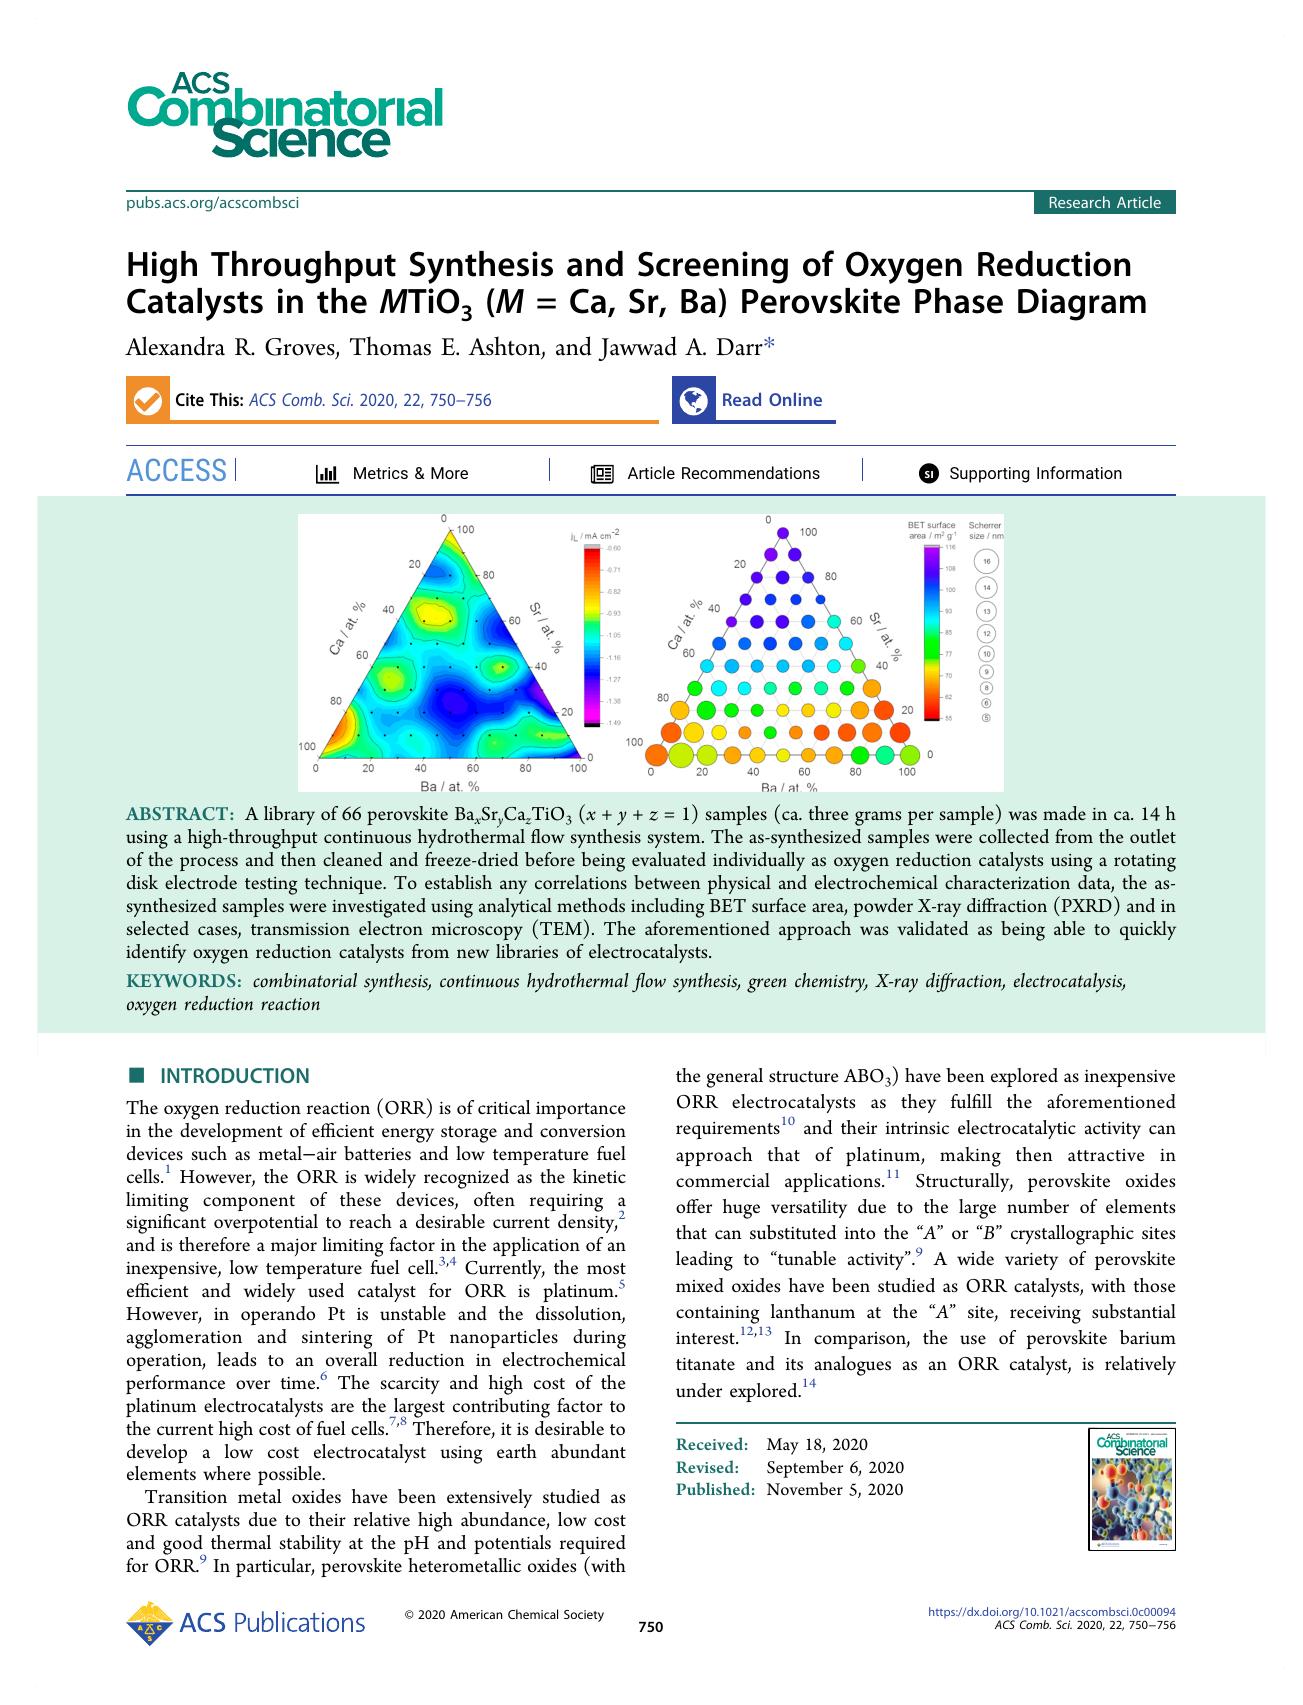 High Throughput Synthesis and Screening of Oxygen Reduction Catalysts in the MTiO3 (M = Ca, Sr, Ba) Perovskite Phase Diagram by Alexandra R. Groves Thomas E. Ashton and Jawwad A. Darr